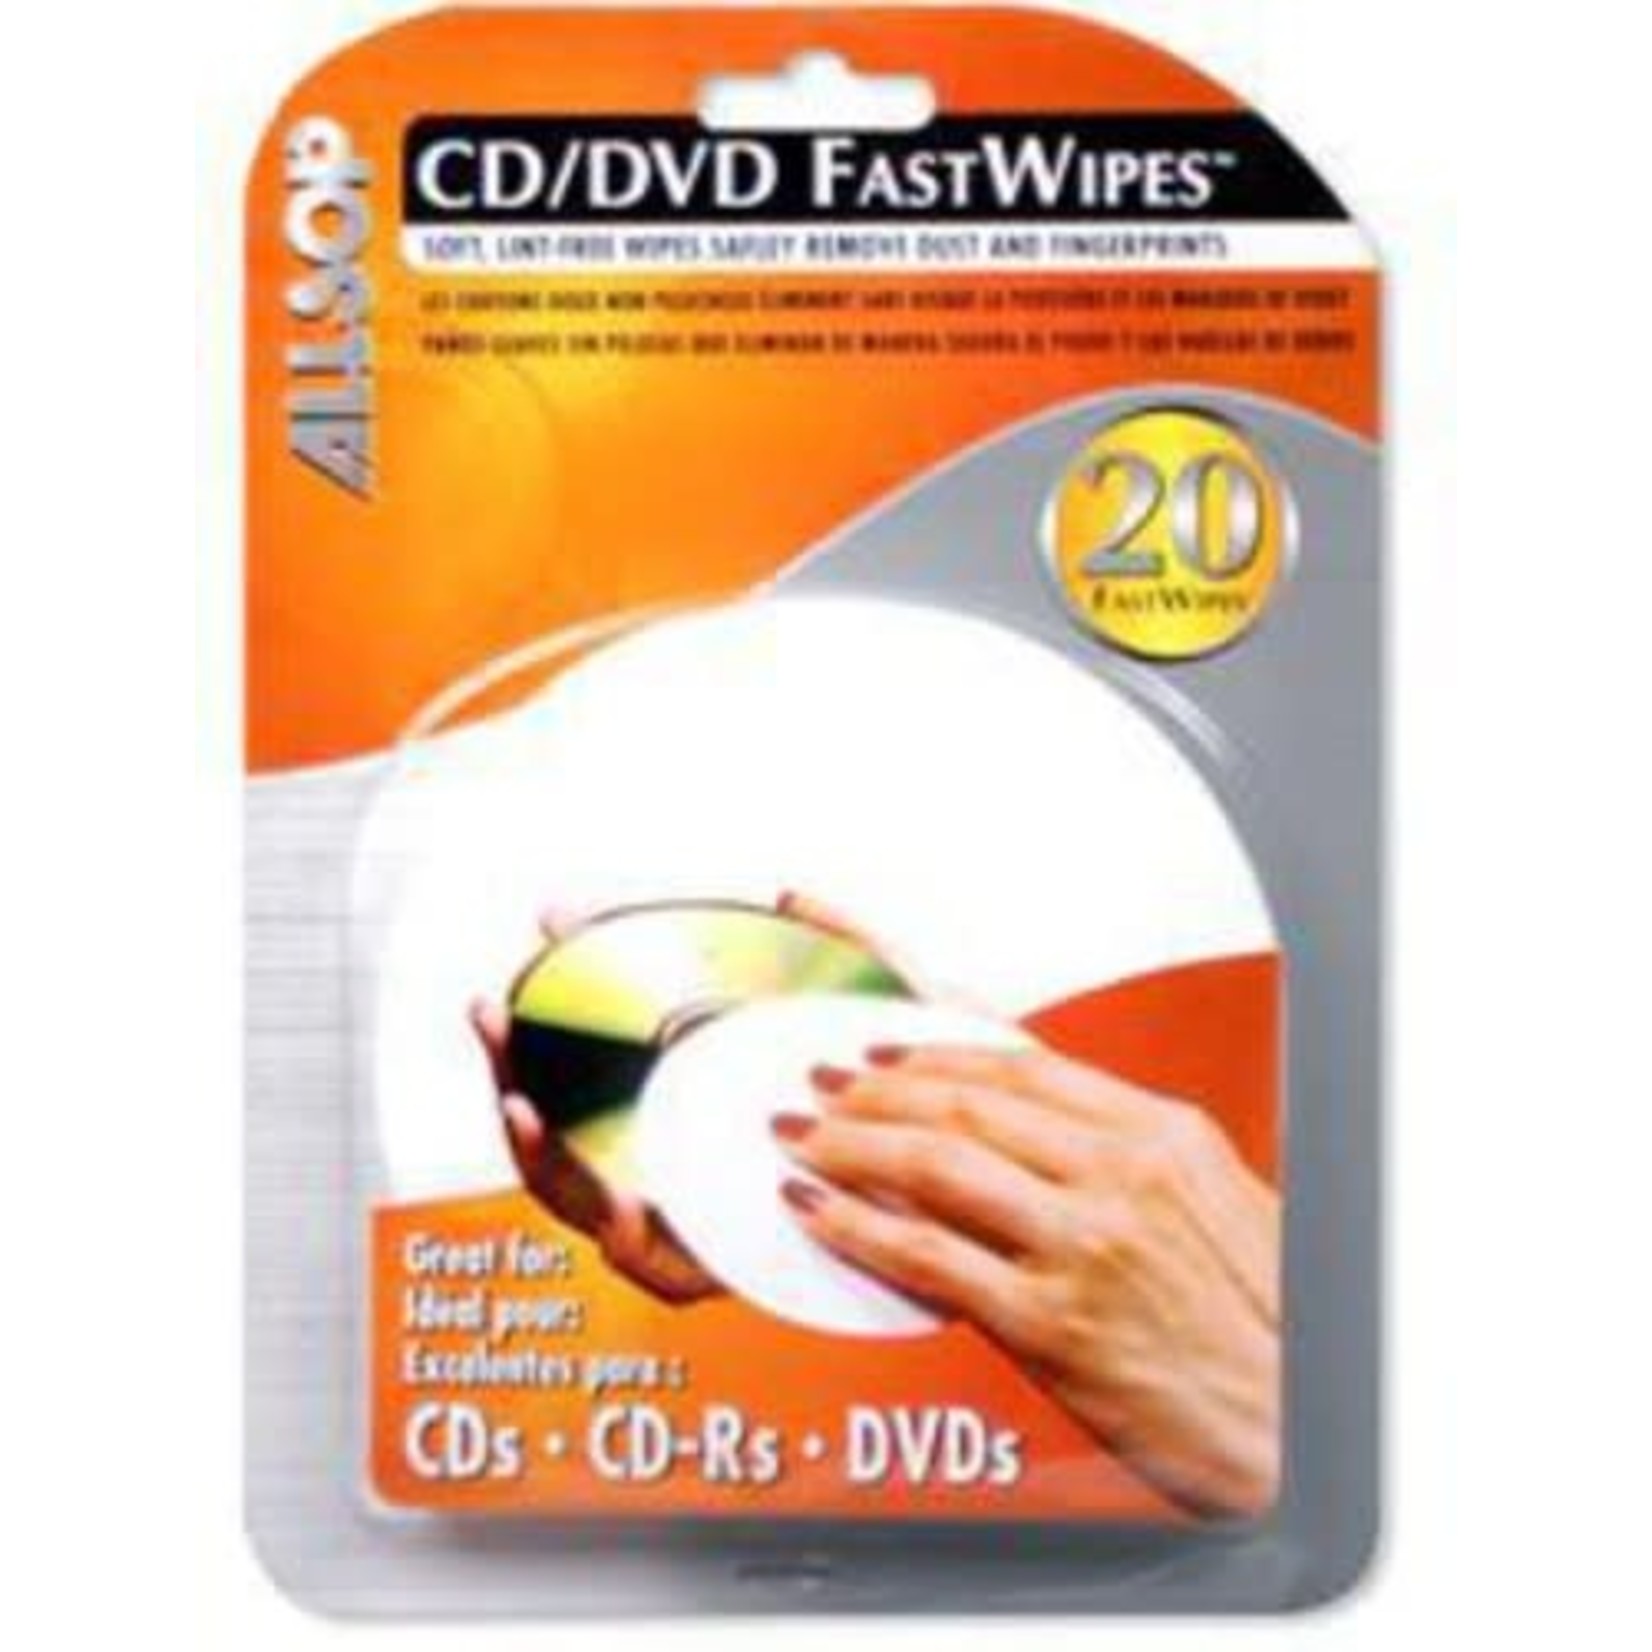 CD/DVD FastWipes - 20 Pack